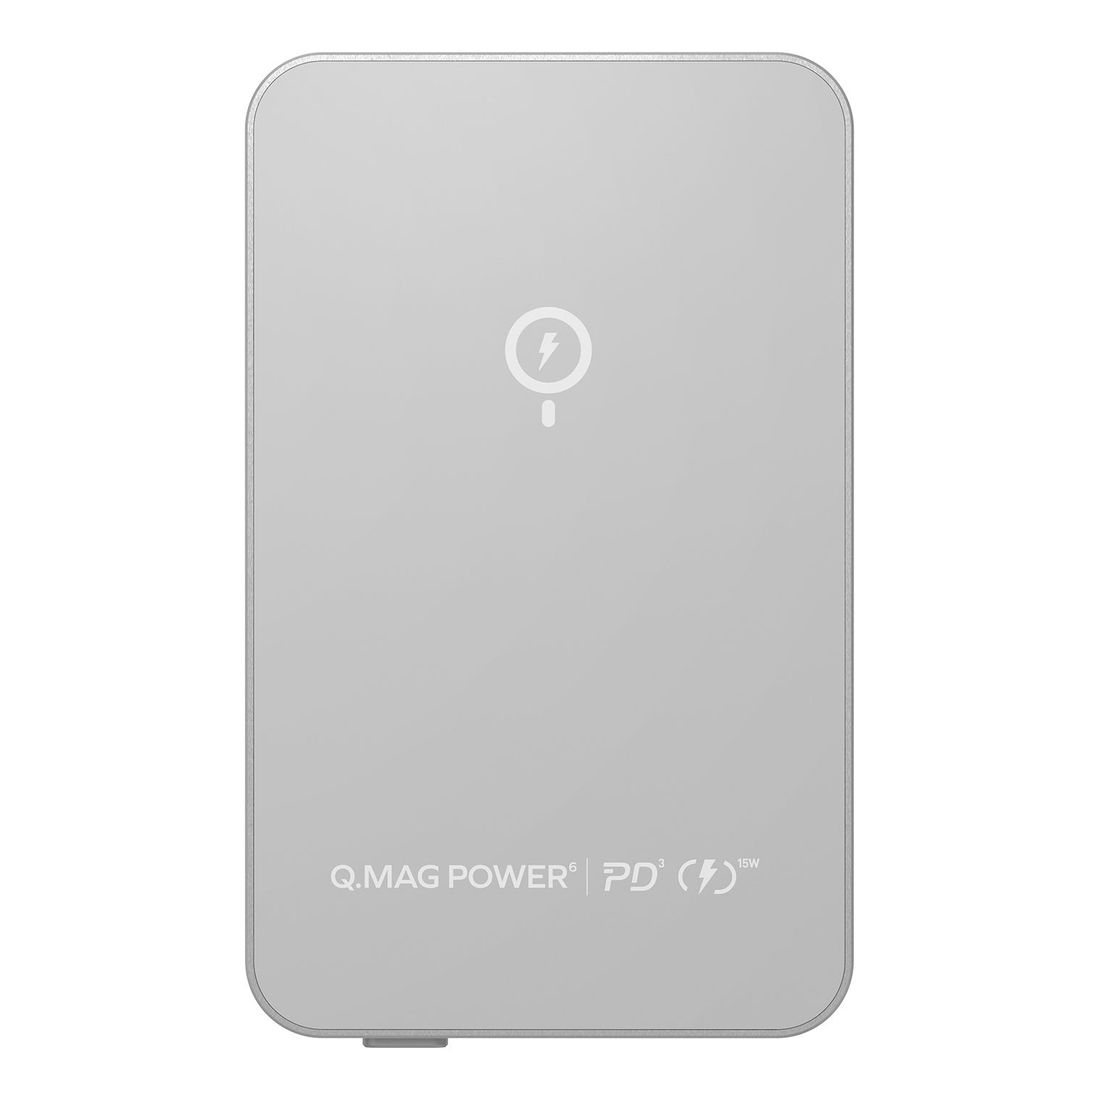 Momax Q.Mag Power 6 5000mAh Silver Magnetic Wireless Battery Pack